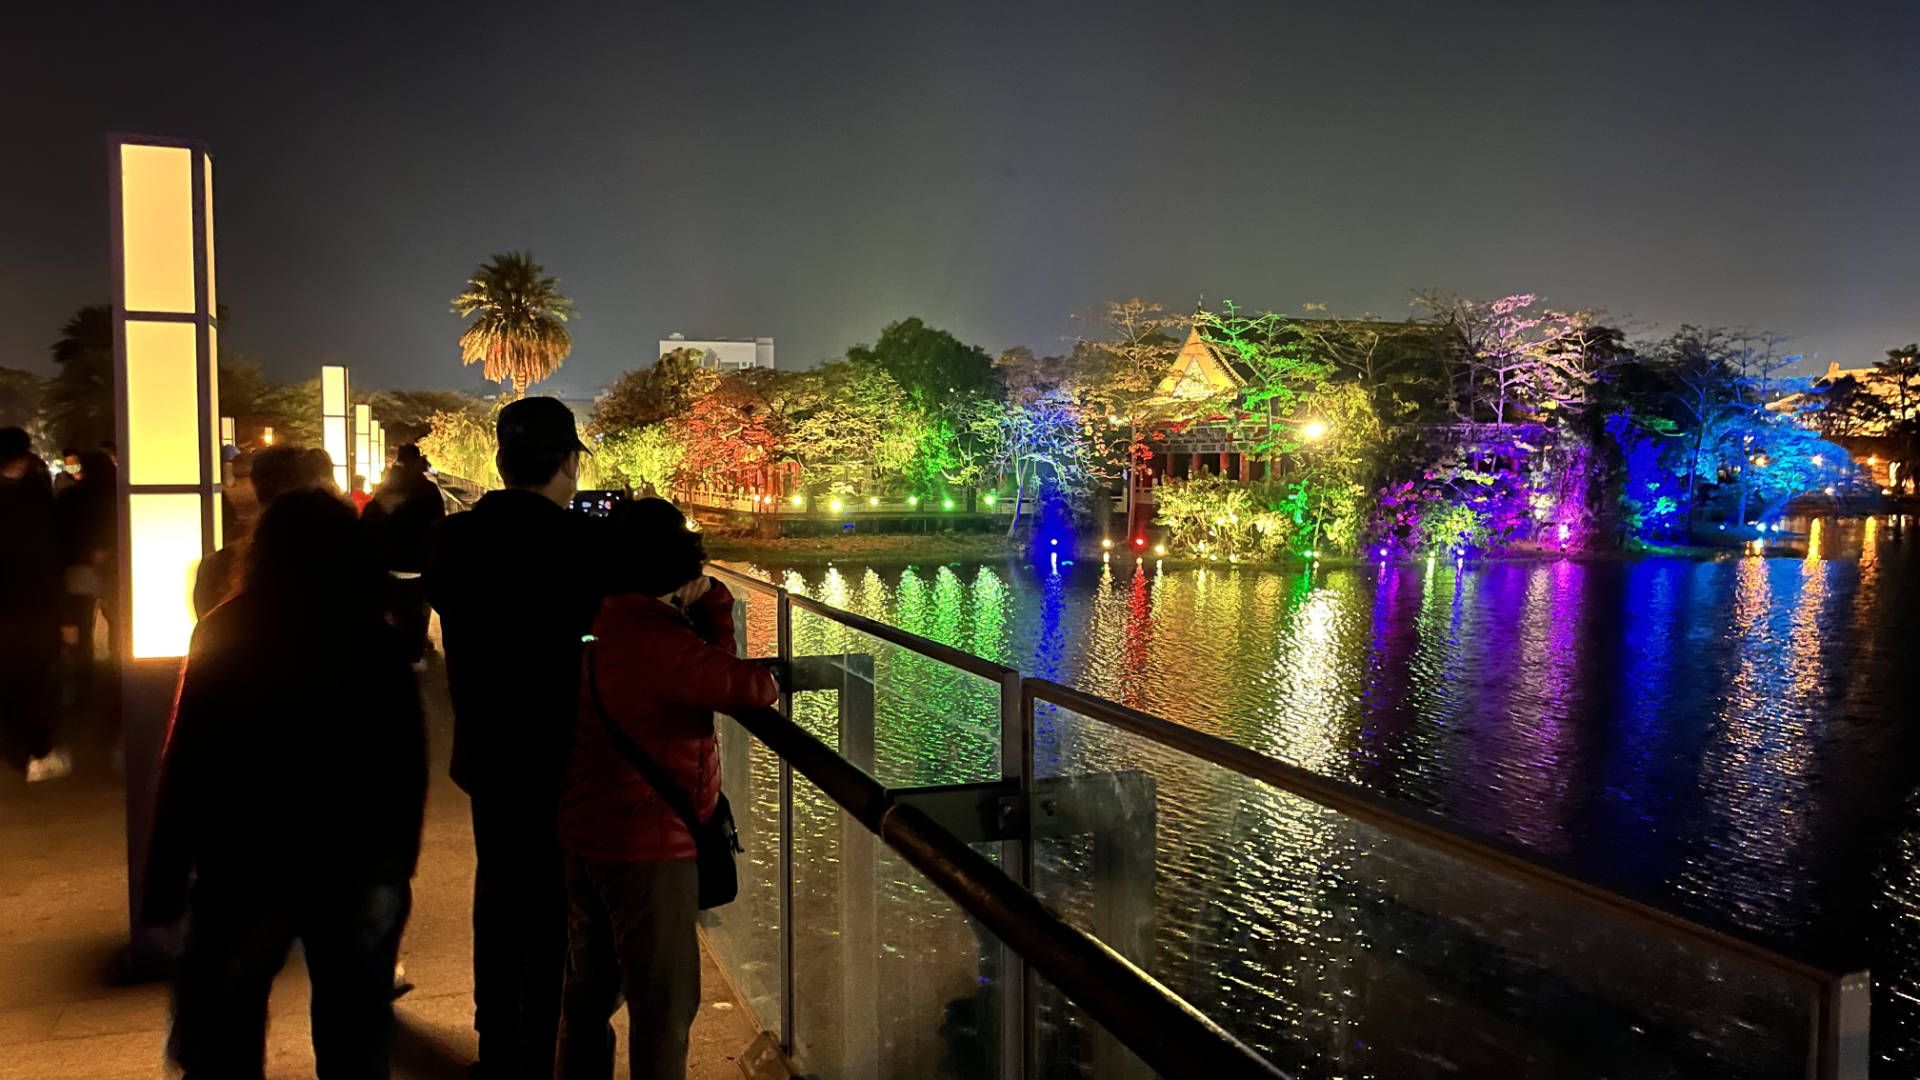 People stand on a bridge looking at a temple across the lake. The temple is surrounded by trees illuminated in rainbow colors.